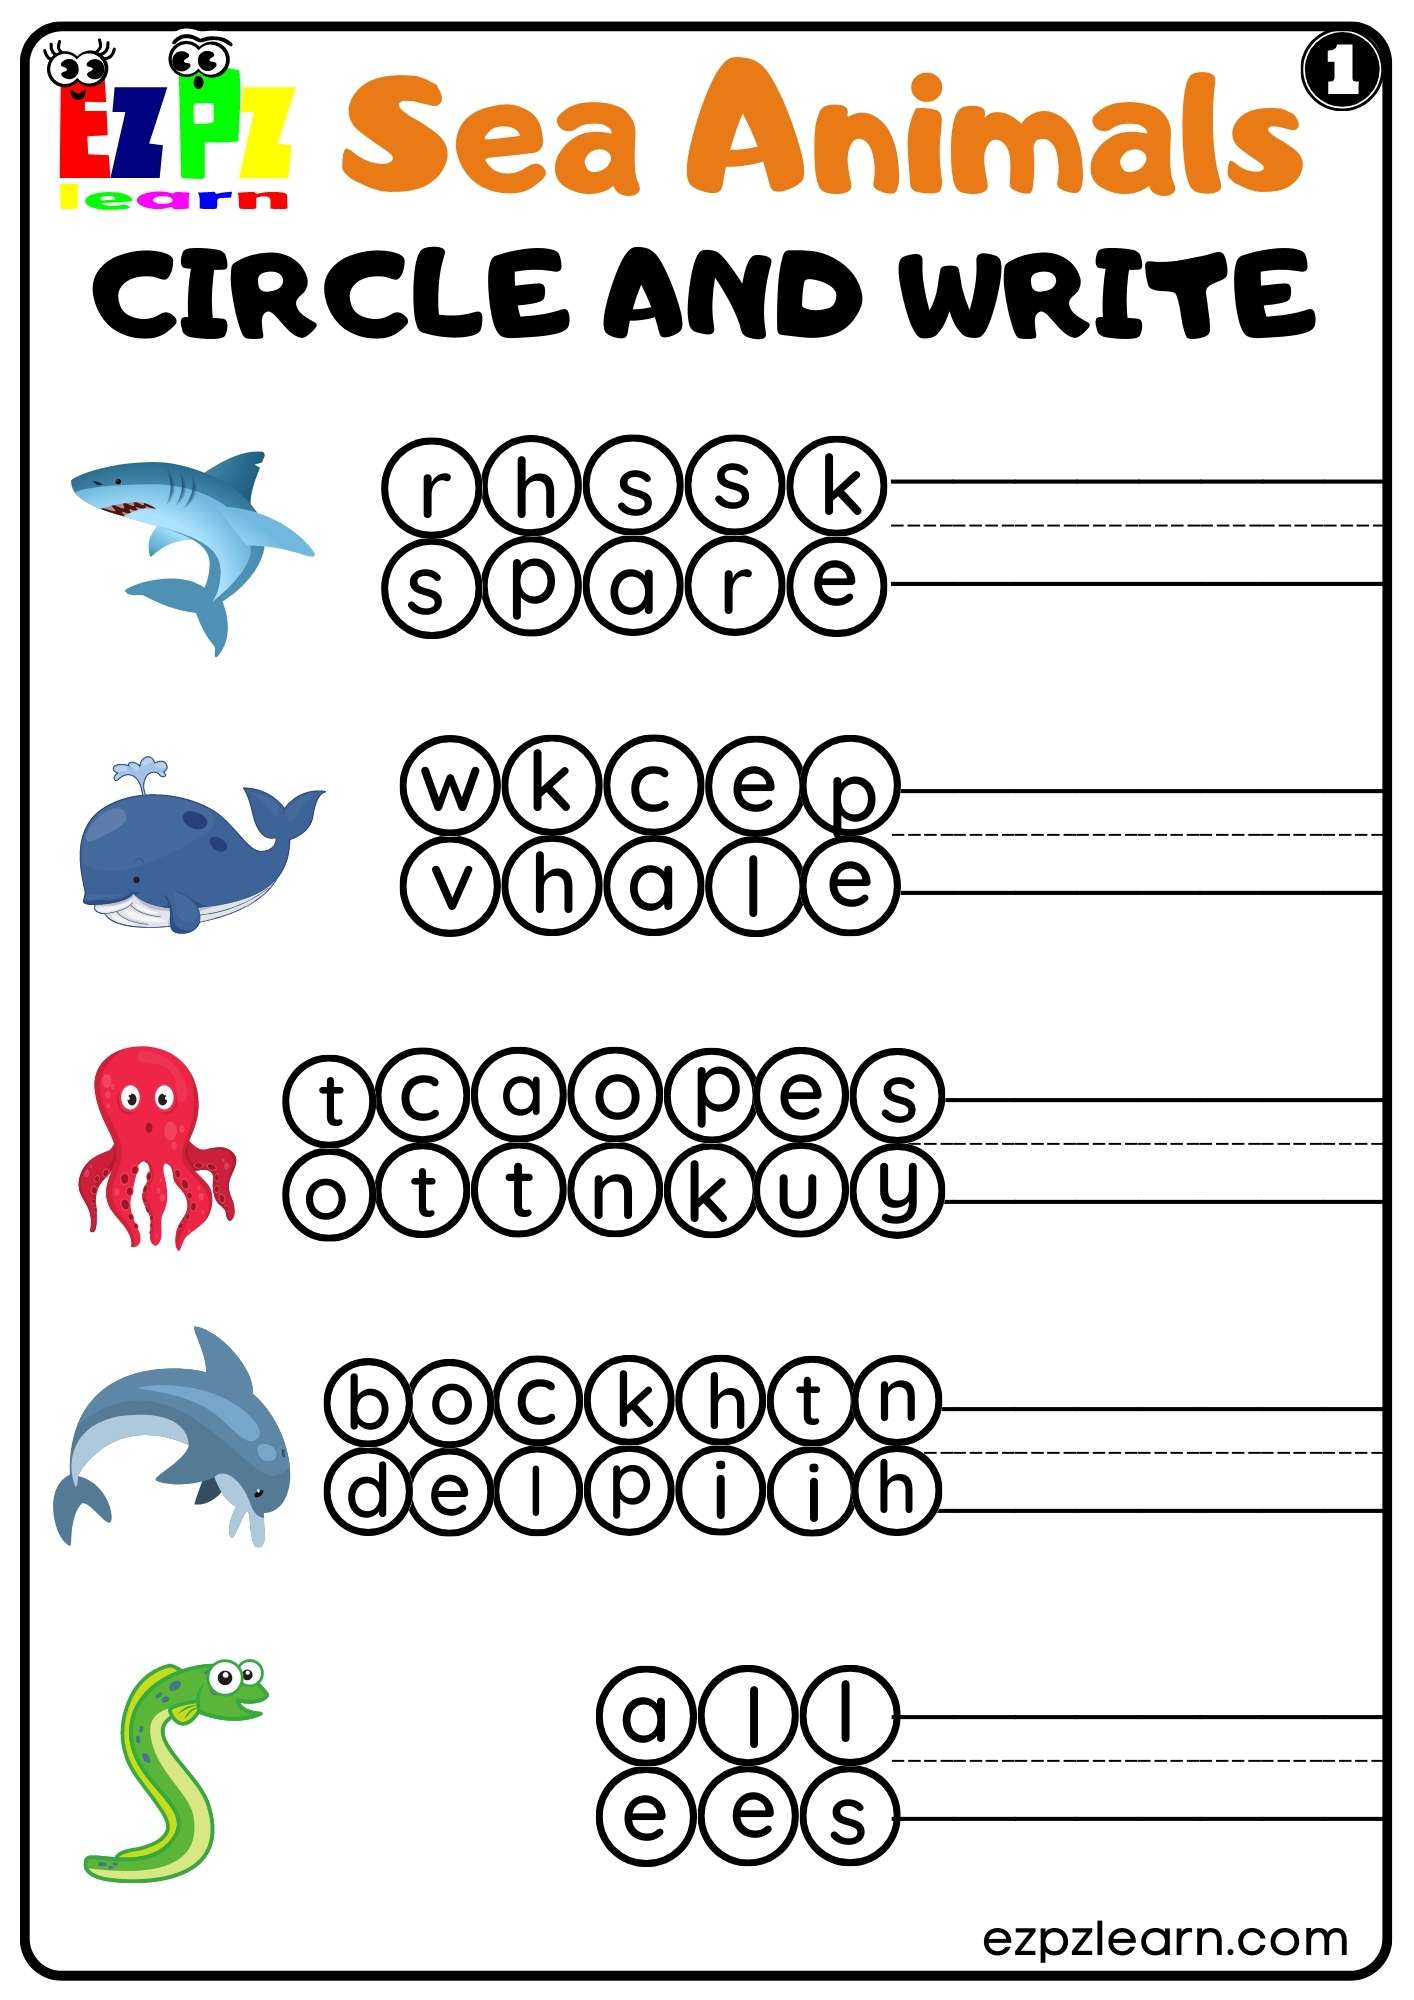 Sea Animals Circle and Write Worksheet For Kids and ESL Set 1 -  